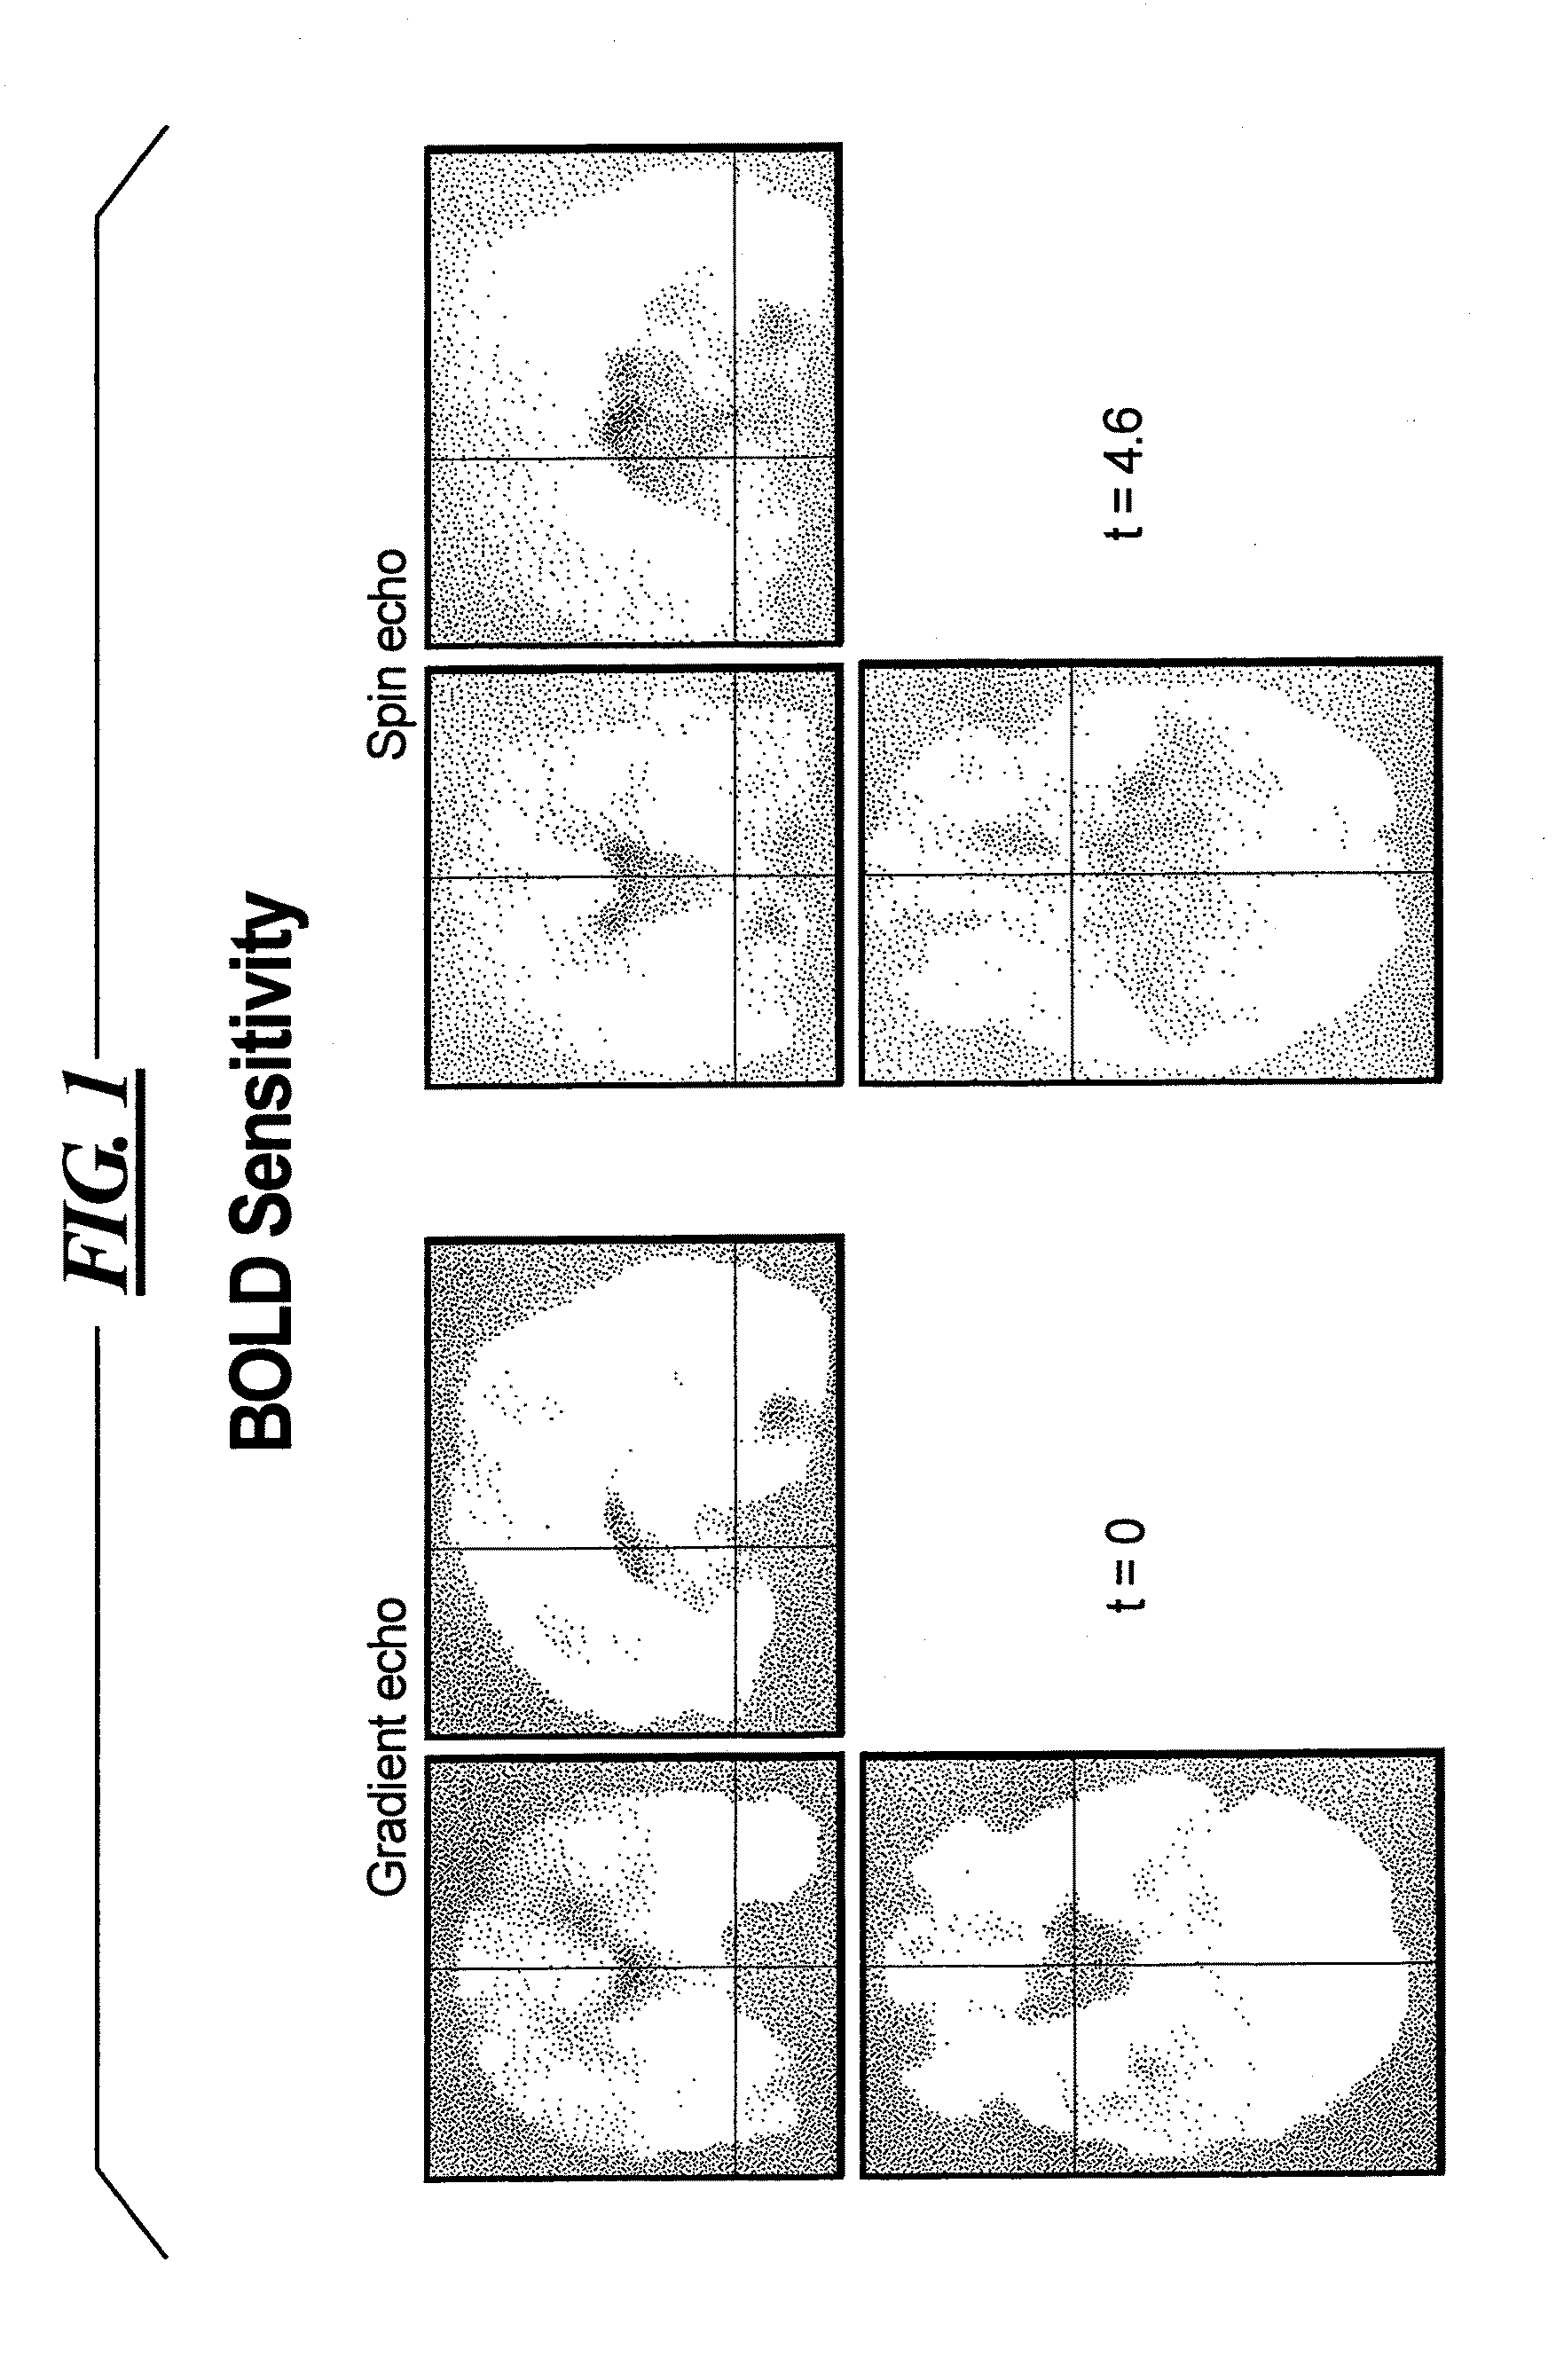 Magnetic resonance method and apparatus using dual echoes for data acquisition